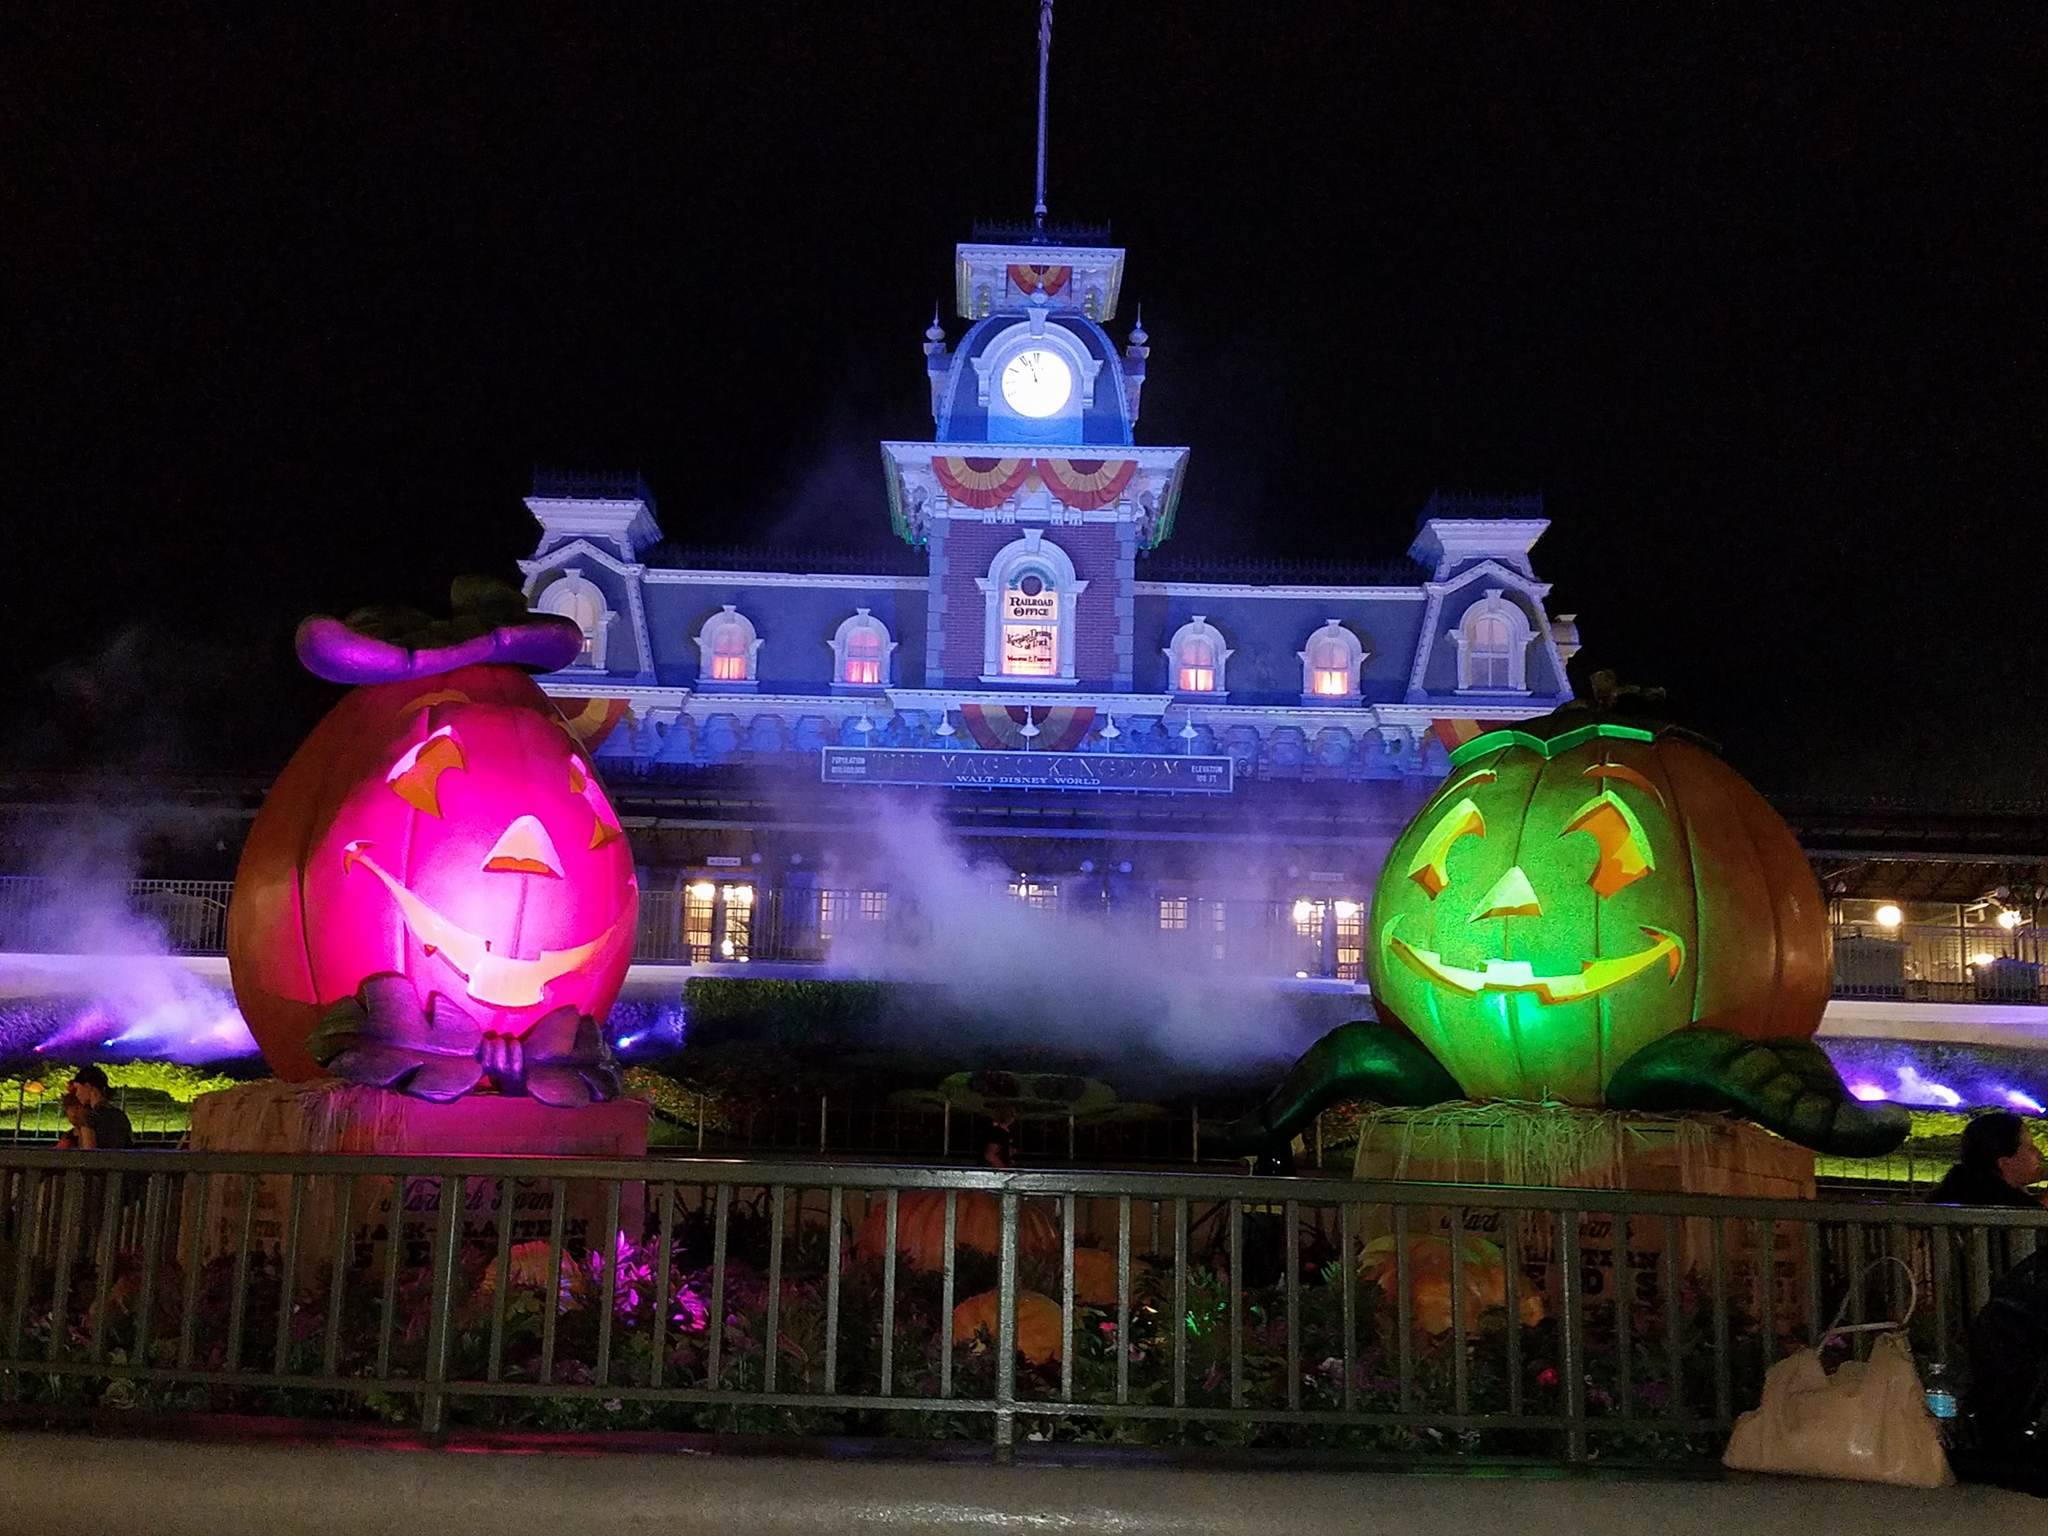 Watch the live videos from the 2016 Mickey’s Not So Scary Halloween Party